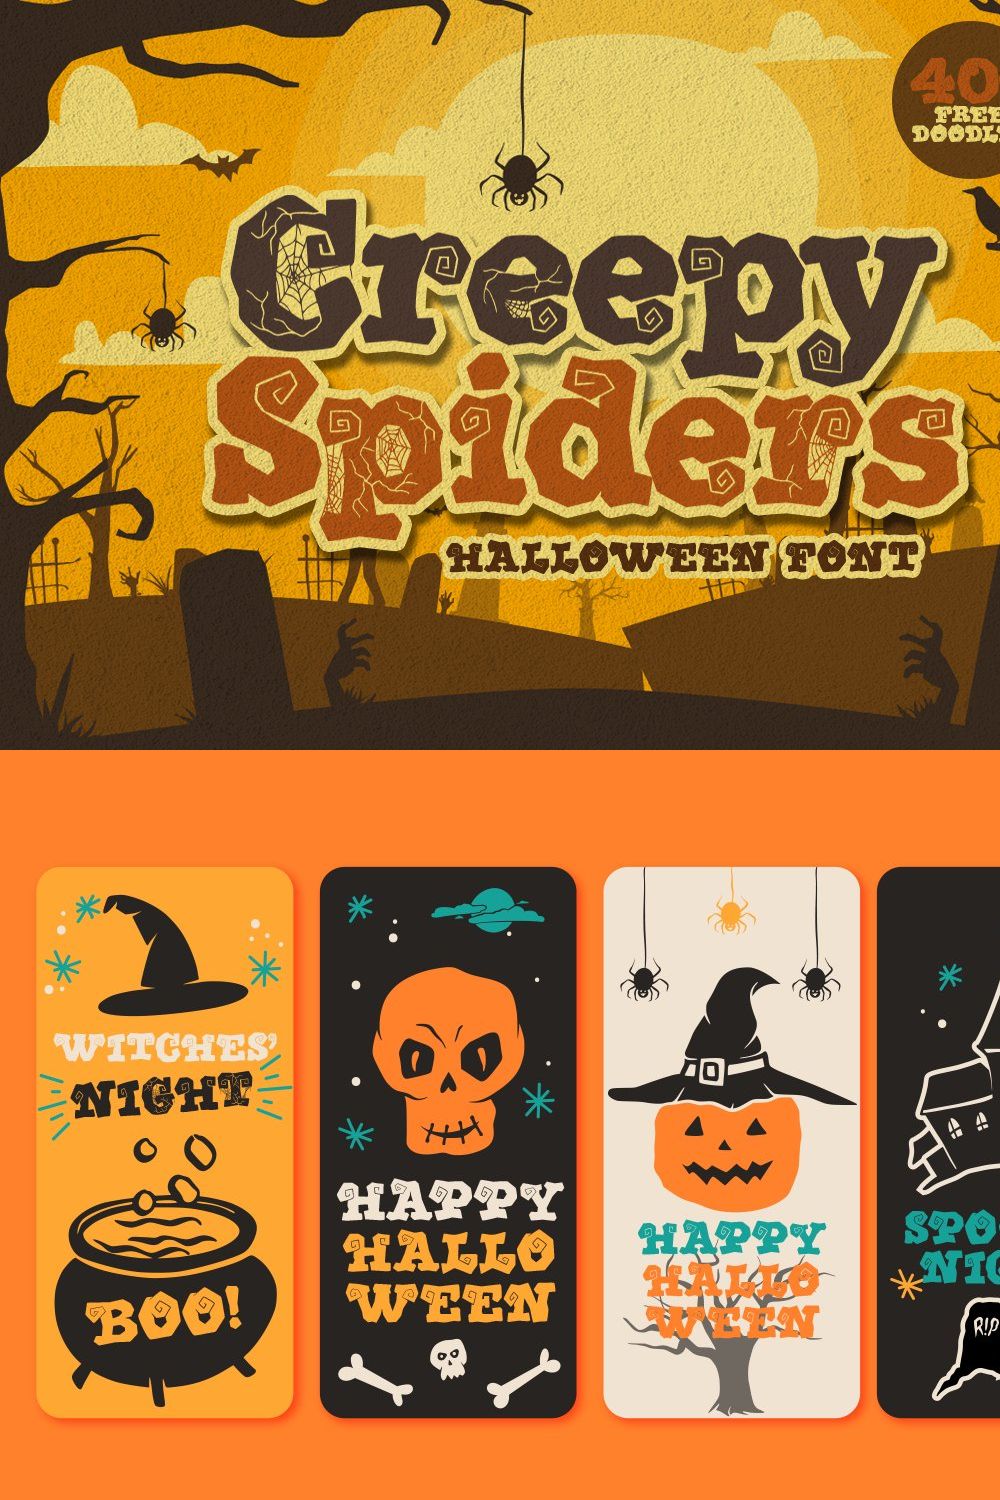 Creepy Spiders || Free Doodles pinterest preview image.